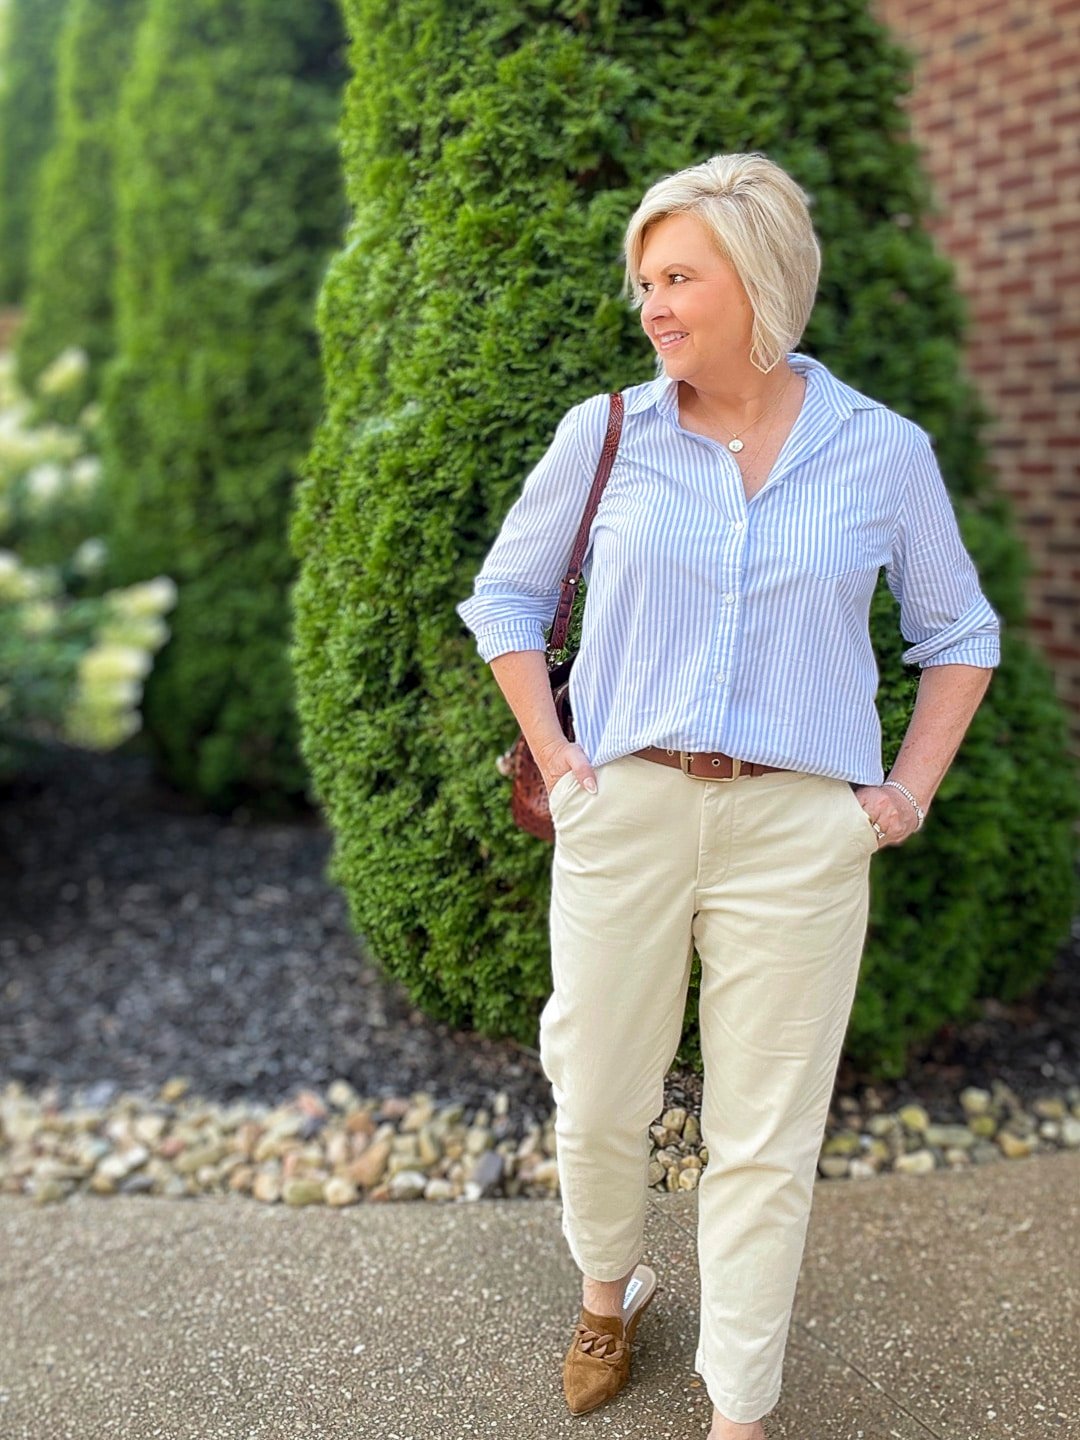 Over 40 Fashion Blogger, Tania Stephens is showing how to style Chinos and a striped shirt for summer6